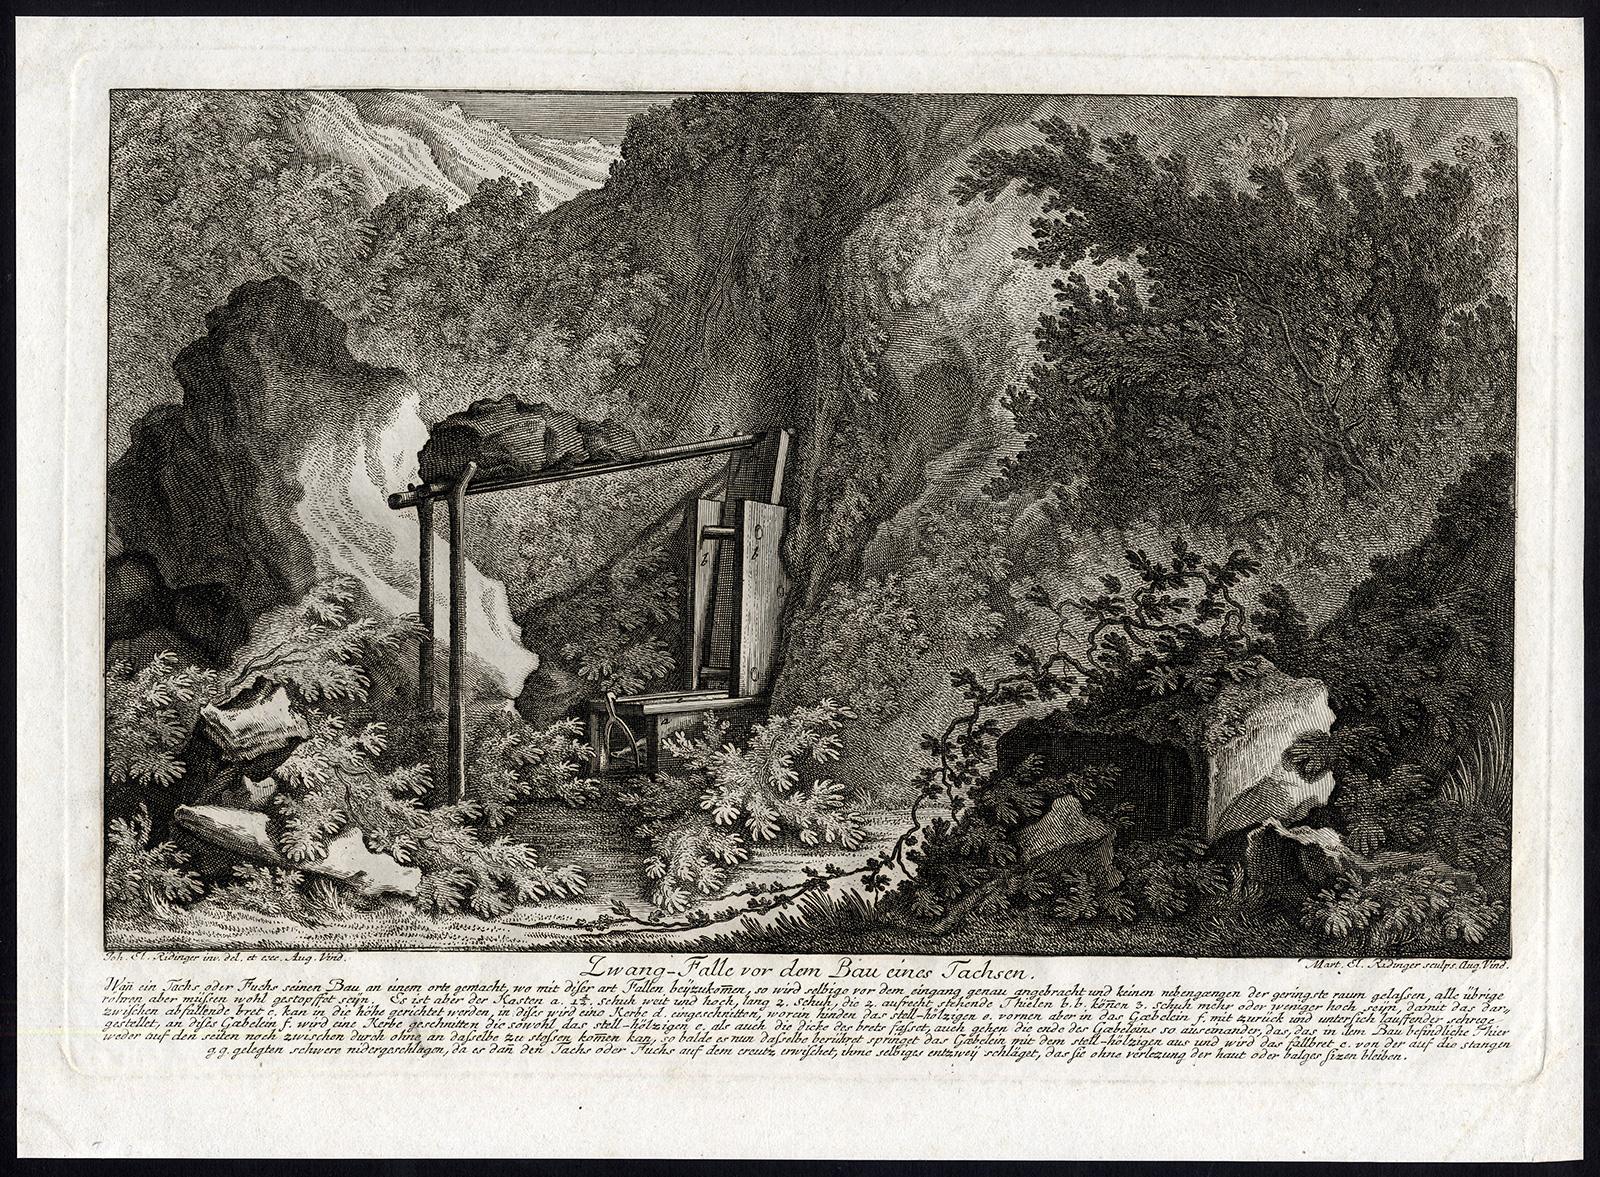 Hunting scene catching a badger in a trap by Ridinger - Engraving - 18th century - Print by Martin Elias Ridinger